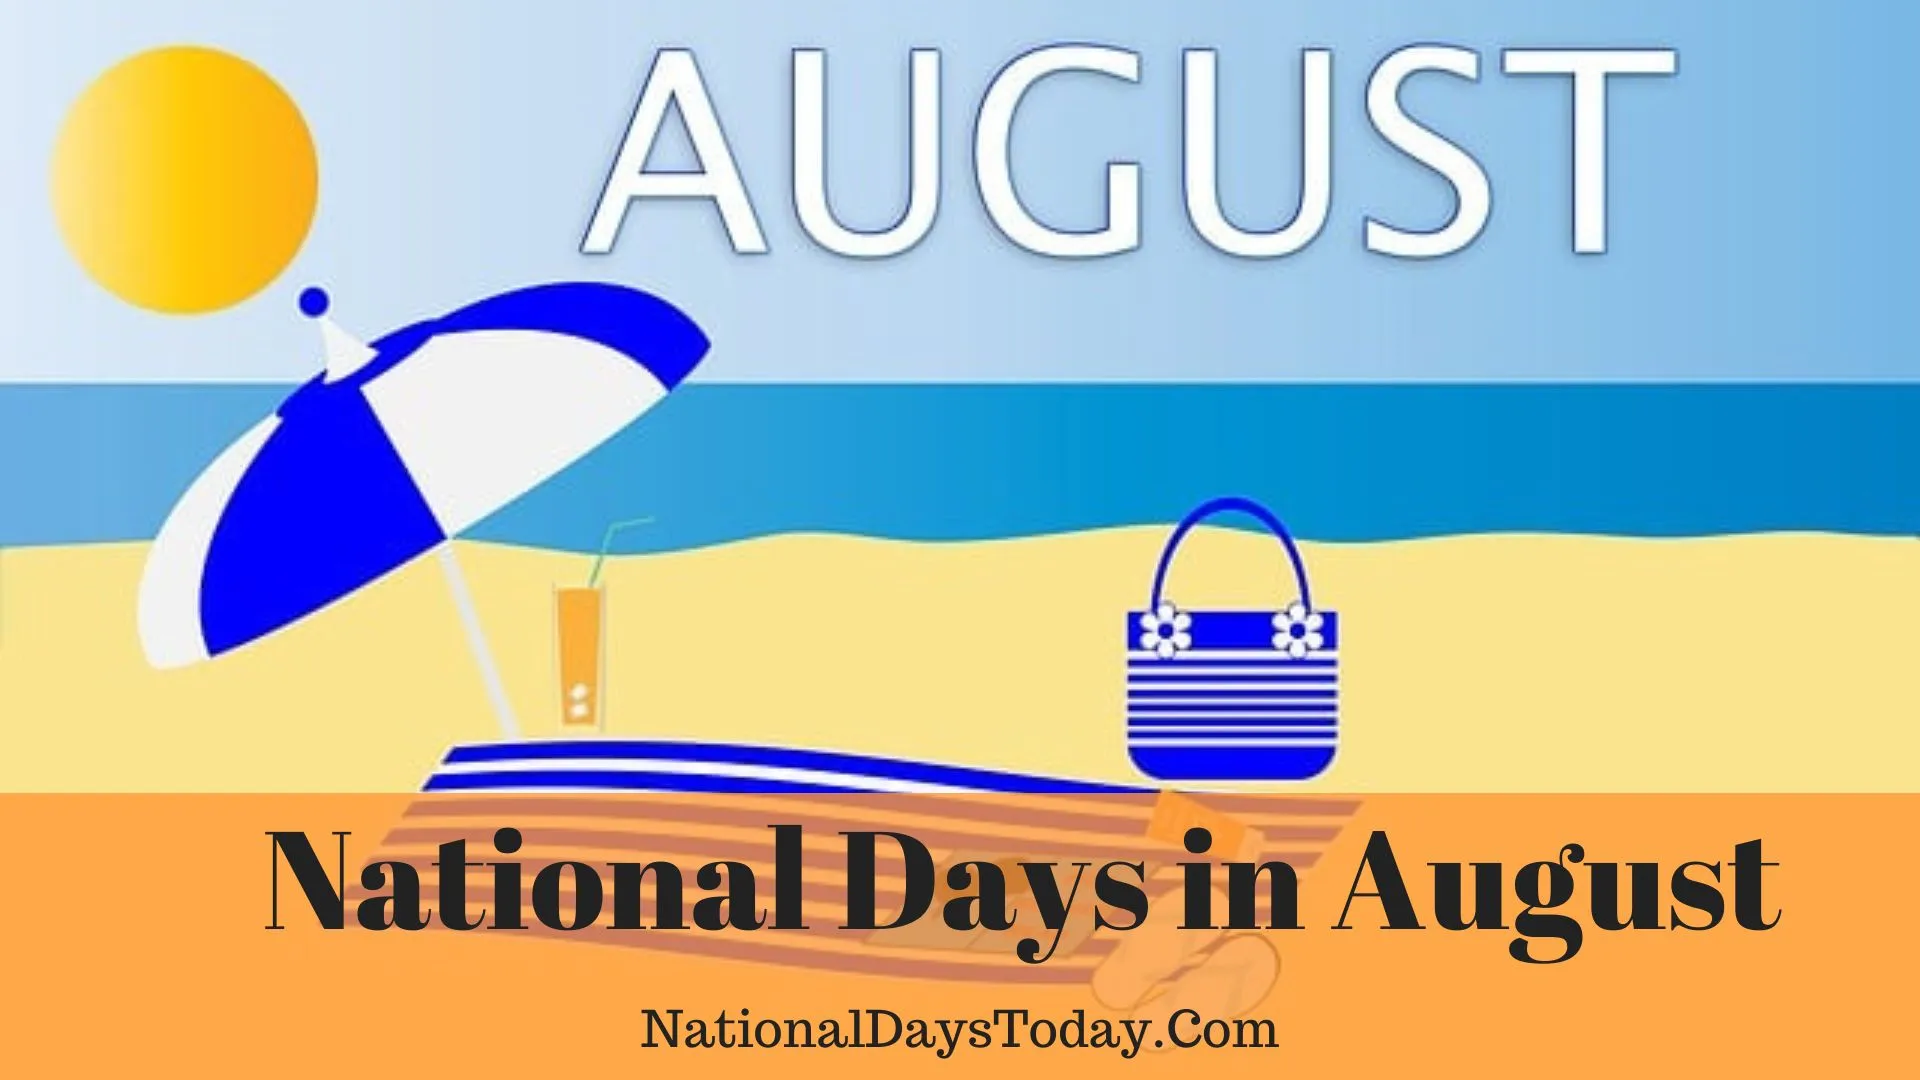 National Days in August